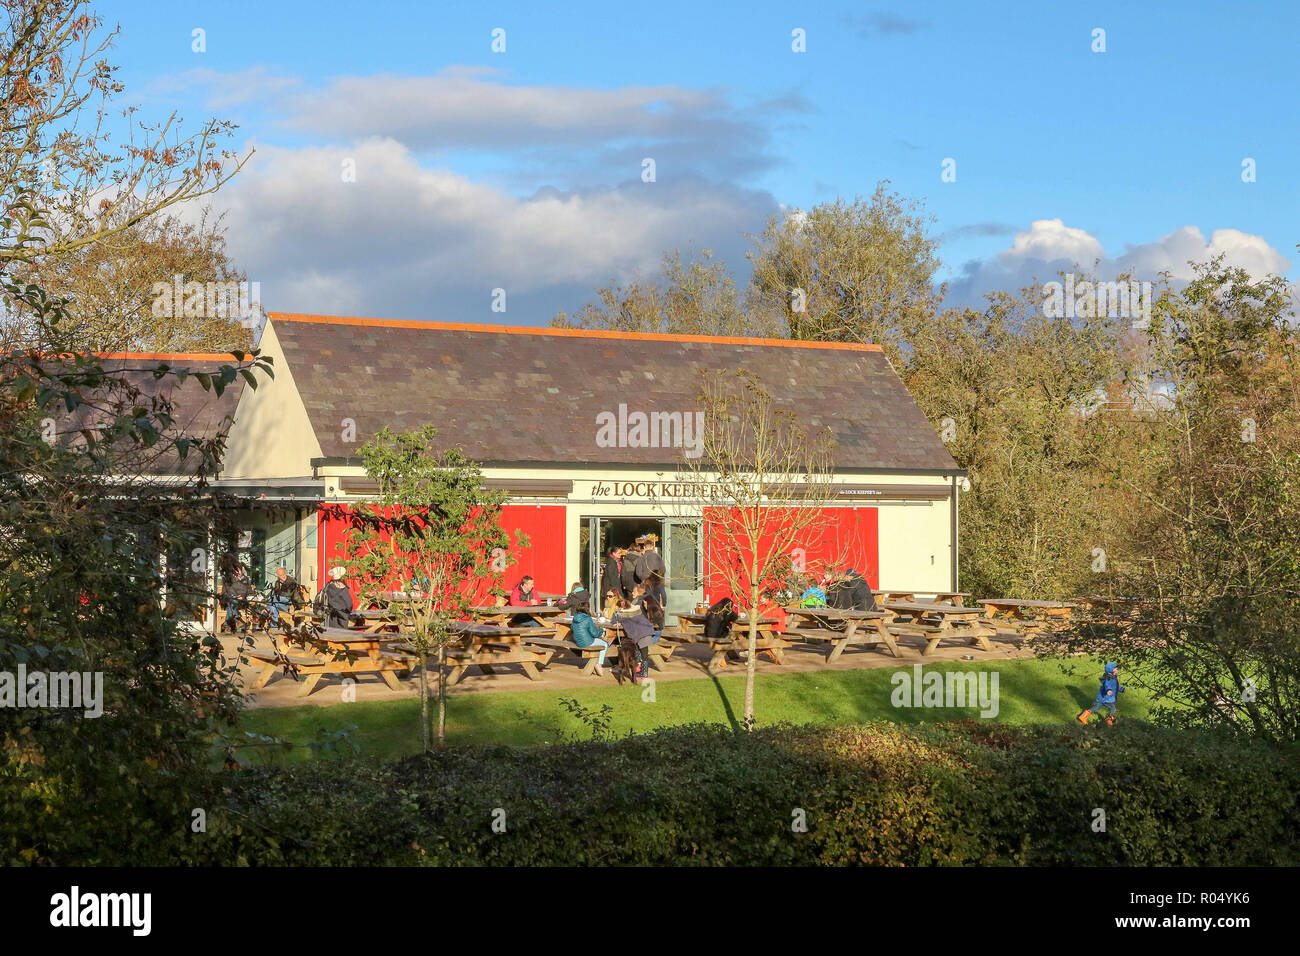 Lagan Towpath, Belfast, Northern Ireland. 01 November 2018. UK weather - a bright but cold day saw autumn colours at their finest along the towpath. With half-term it was a day to be wrapped up and out. People sitting outside The Lock Keeper's Inn, River Lagan, Belfast  Credit: David Hunter/Alamy Live News. Stock Photo